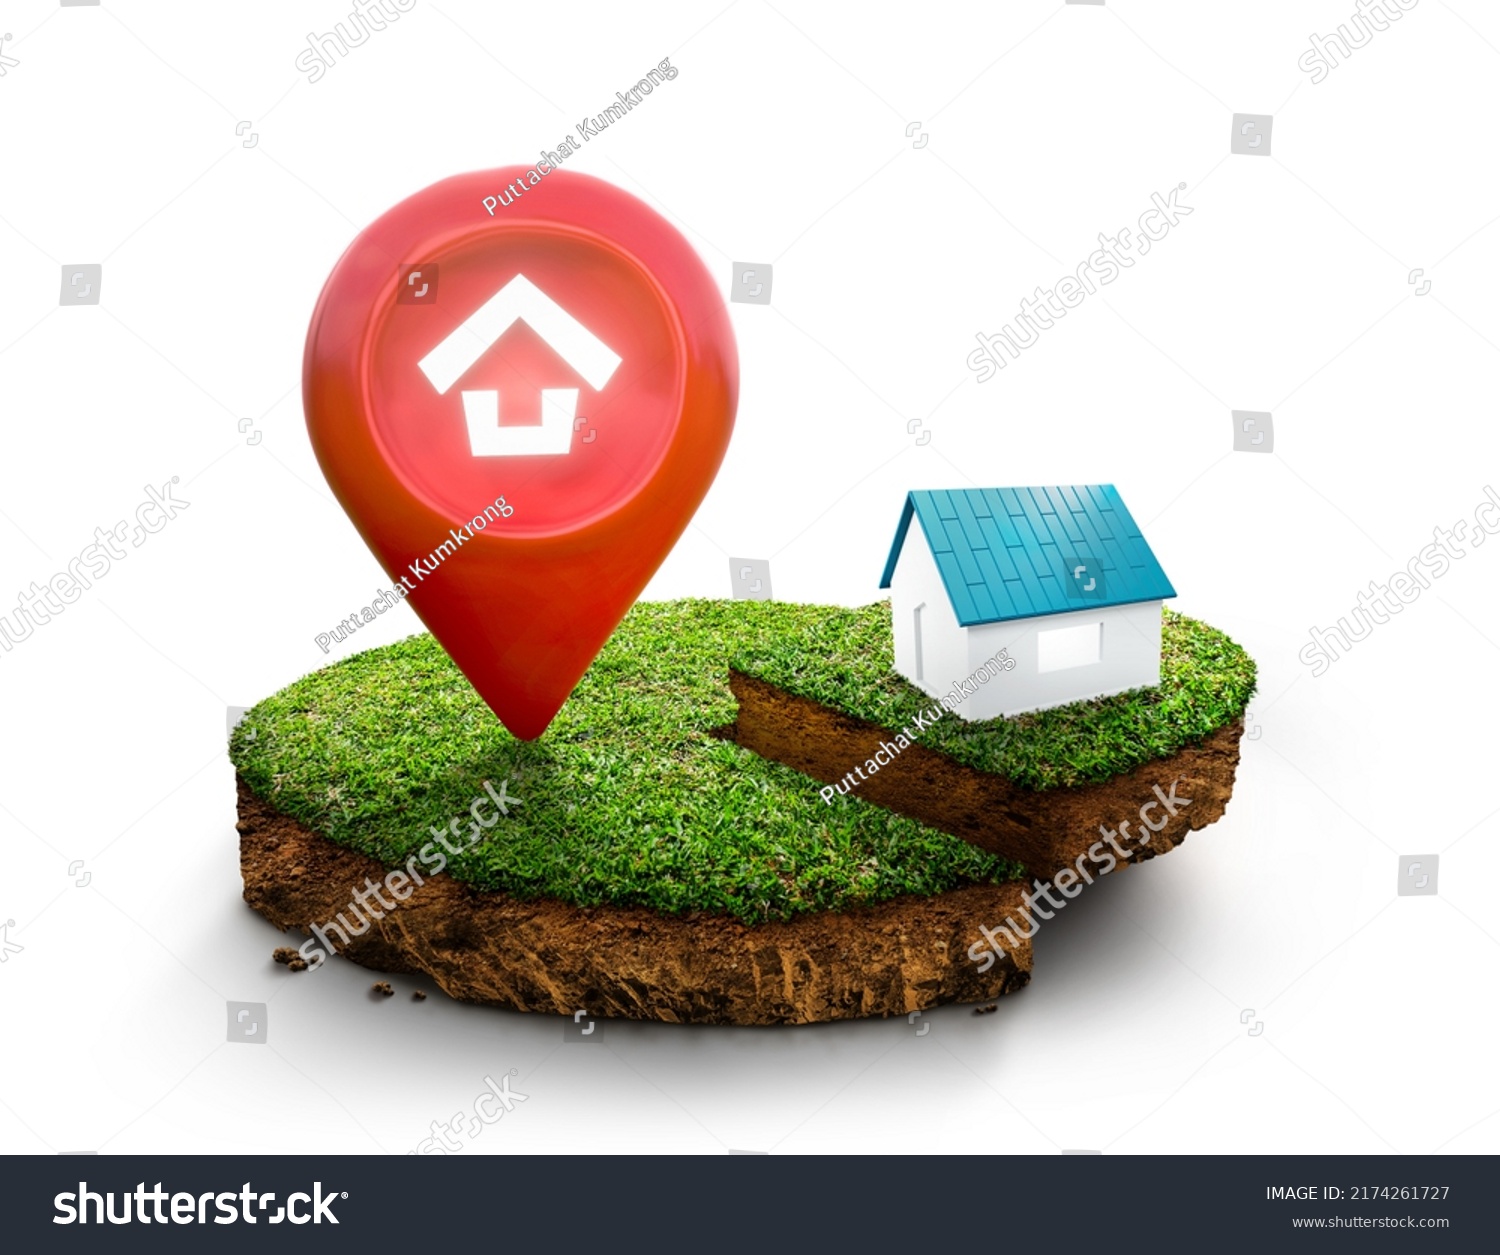 House symbol with location pin icon on round soil ground cross section with earth land and green grass, ground ecology isolated on white background. real estate sale, property investment concept. 3D. #2174261727